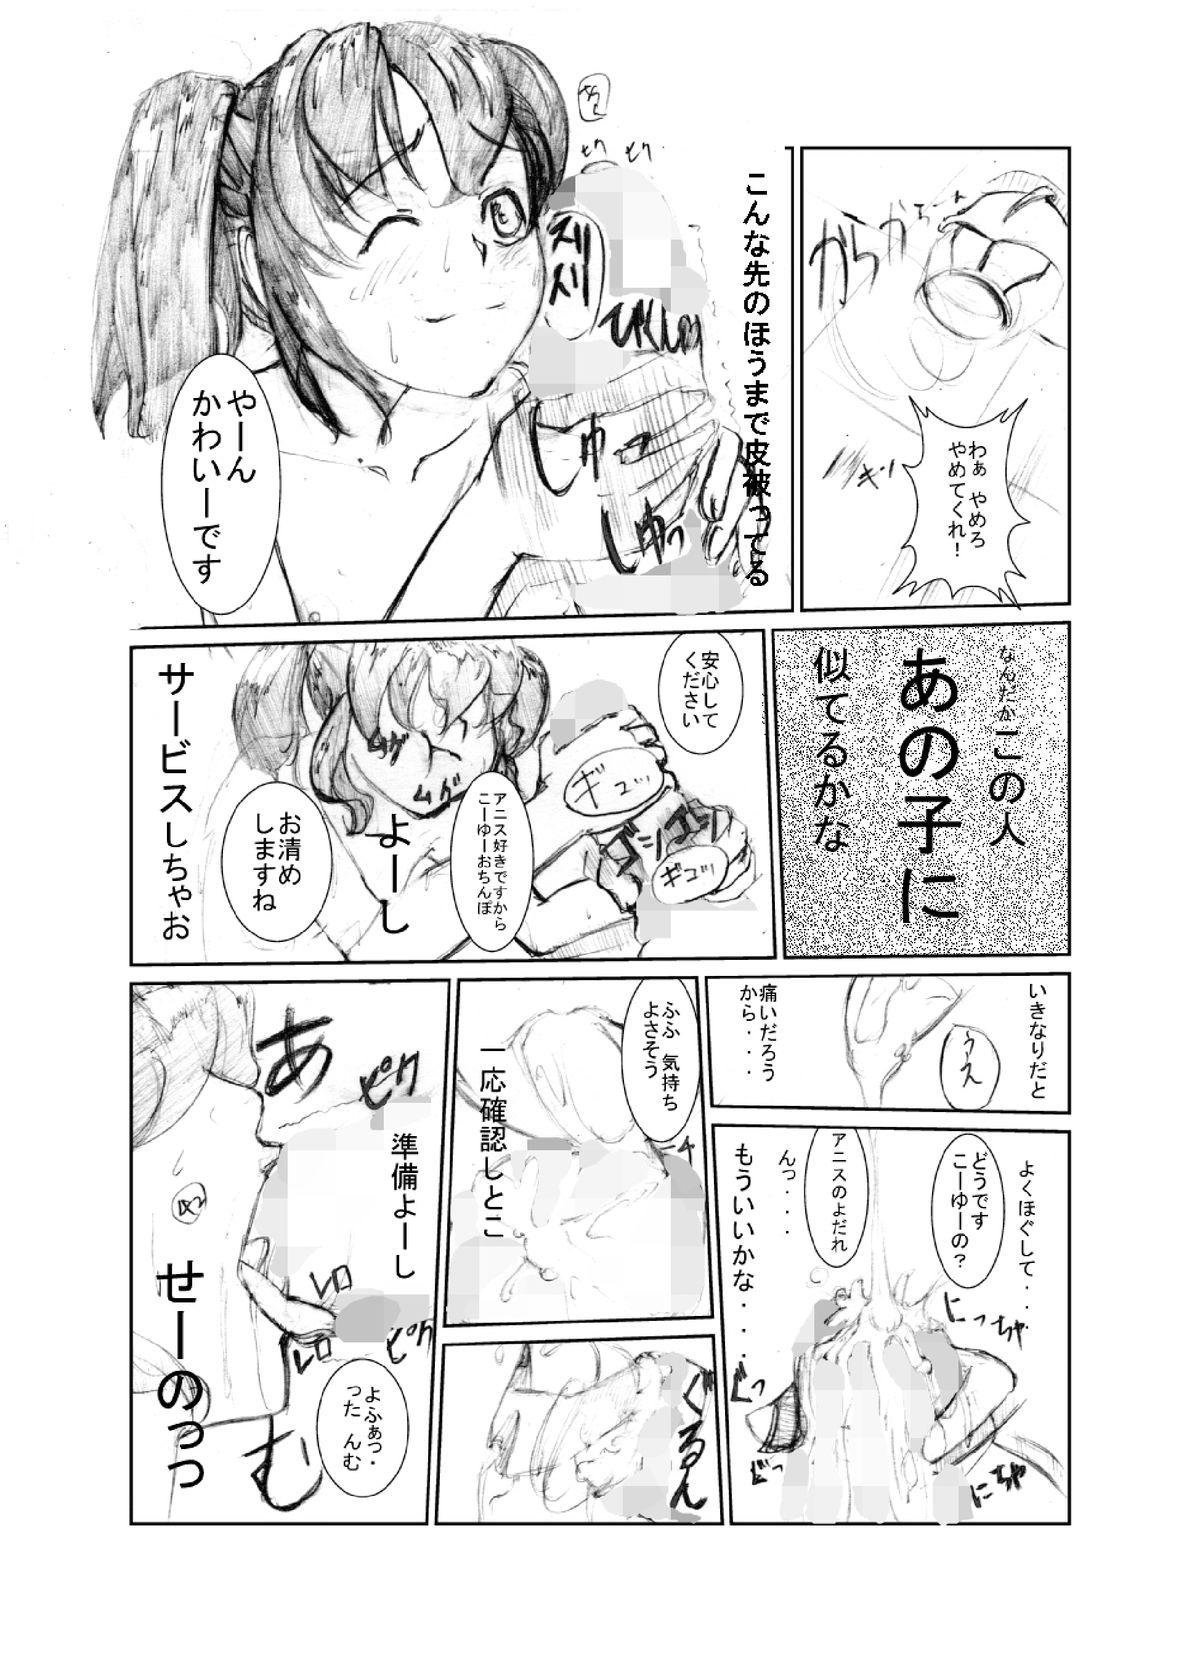 Moaning 虹は溶けゆく 朝焼けに - Tales of the abyss Bangbros - Page 11